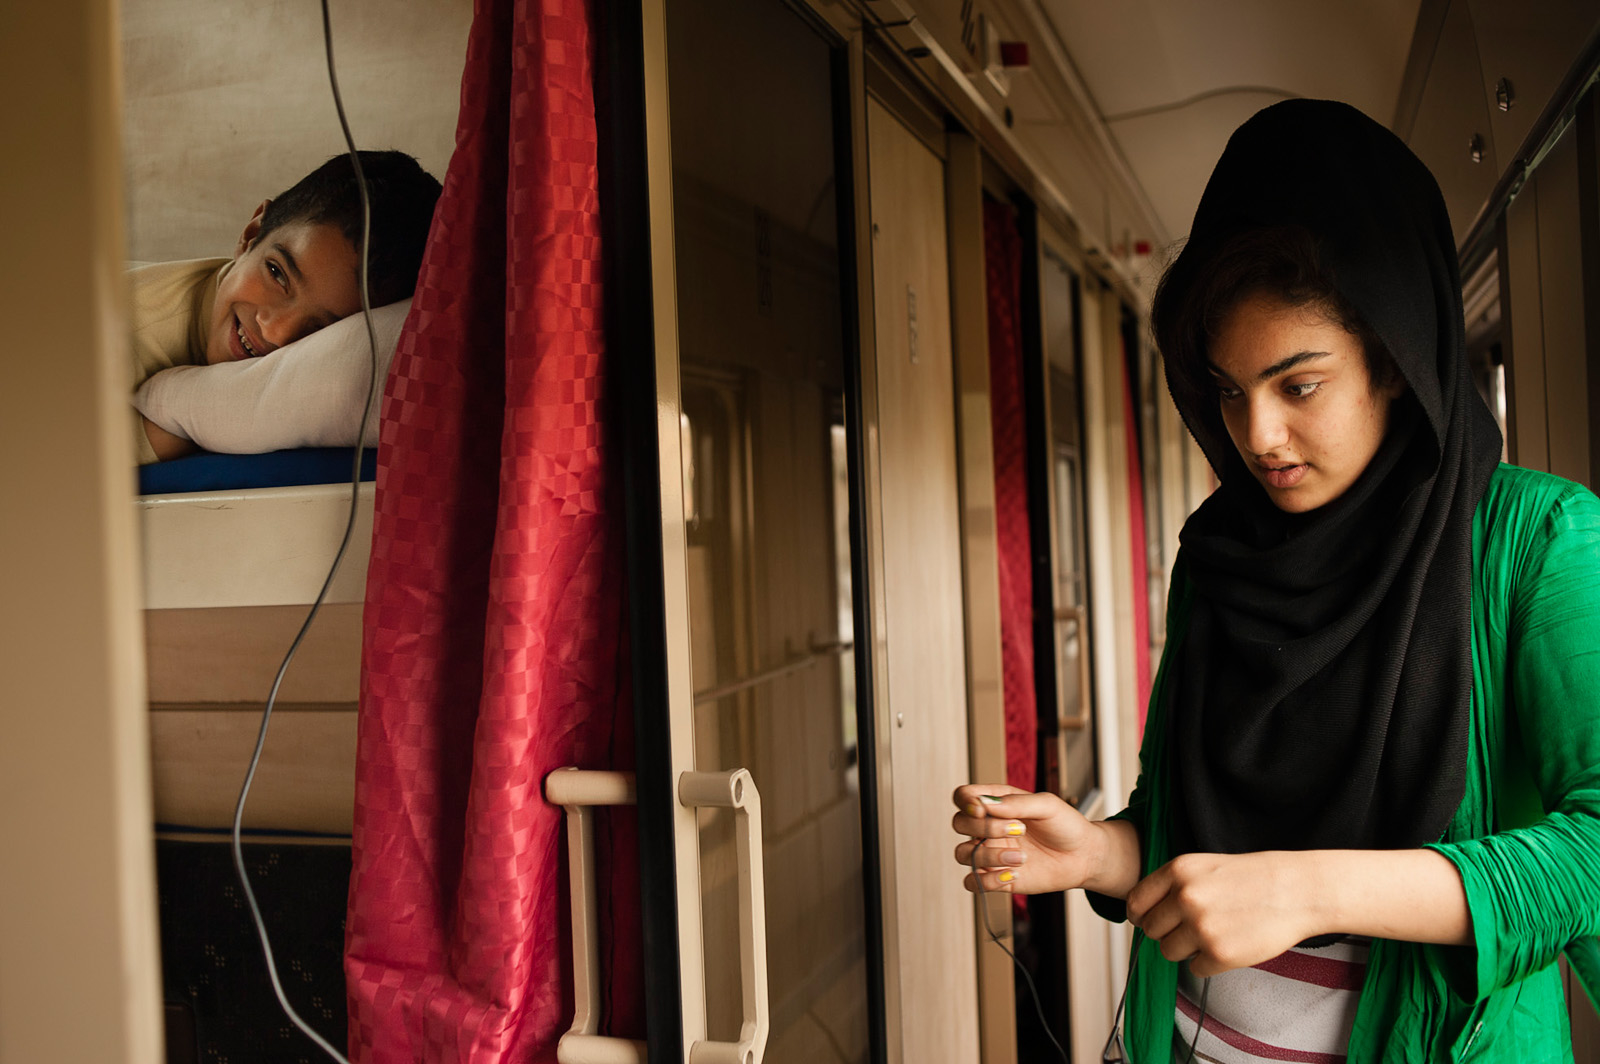 Mozhdeh, 15, and her eight year old brother spend time in their cabin on the TransAsia train that goes from Tehran to Ankara. They are both equally saddened and confused by their parents' decision to flee the country and become refugees in Turkey. Eastern Azerbaijan, Iran, April 4, 2013.